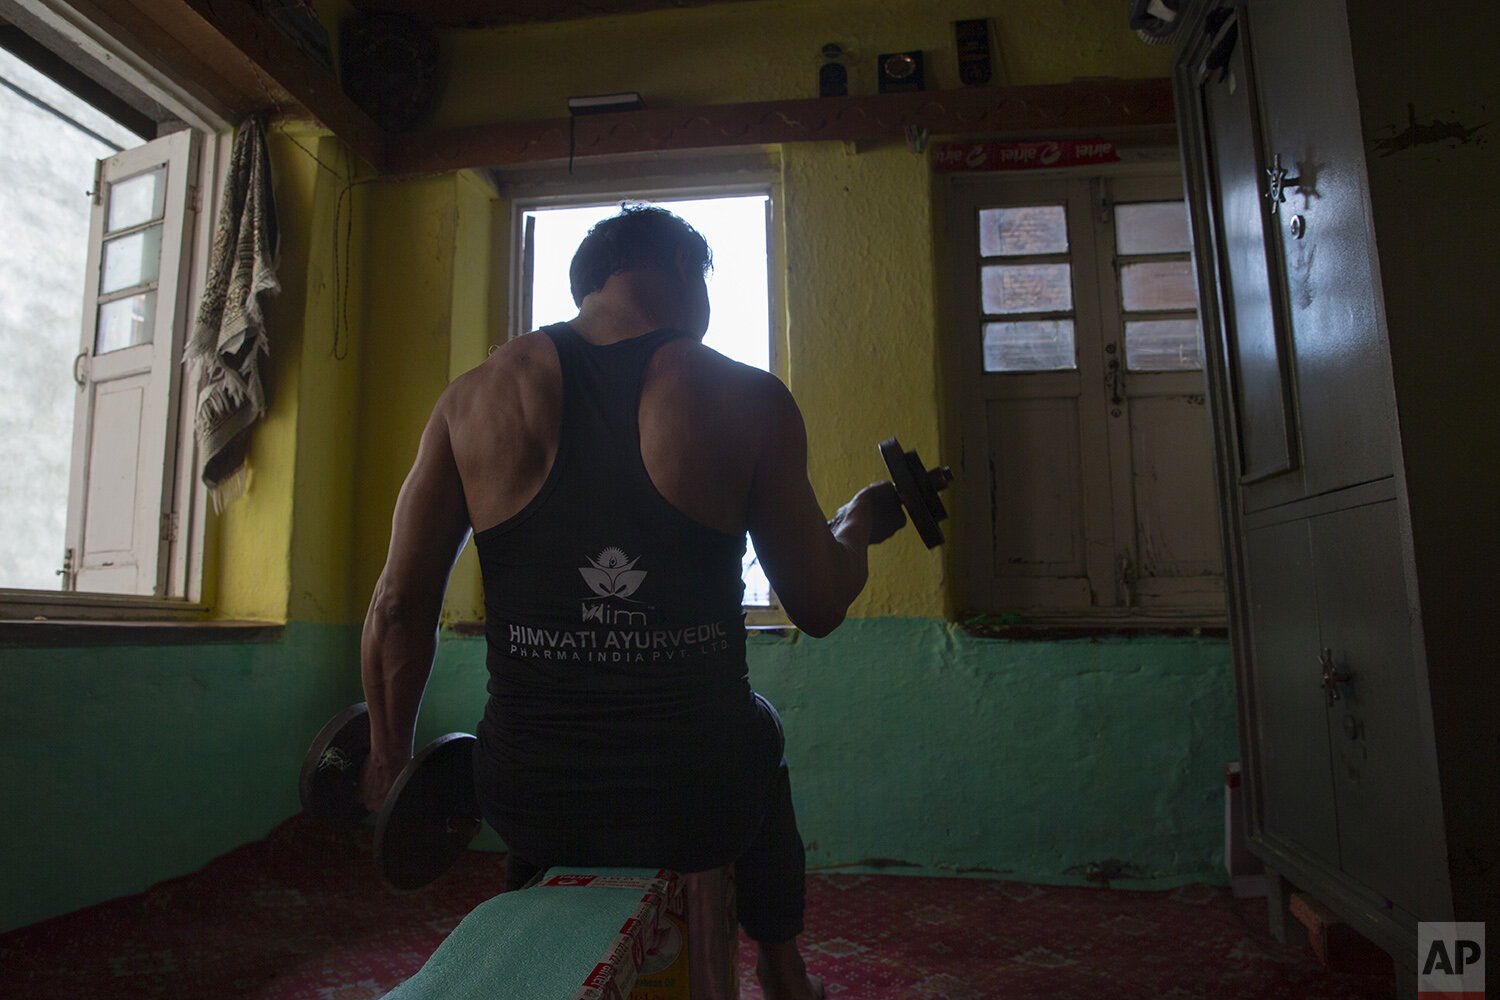  Weightlifter Bashir Ahmed practices at his home in Srinagar, Indian controlled Kashmir, April 21, 2020. Like many other athletes, the coronavirus pandemic has restricted Ahmed to his home. But lockdown for the 7 million residents of Kashmir is nothi